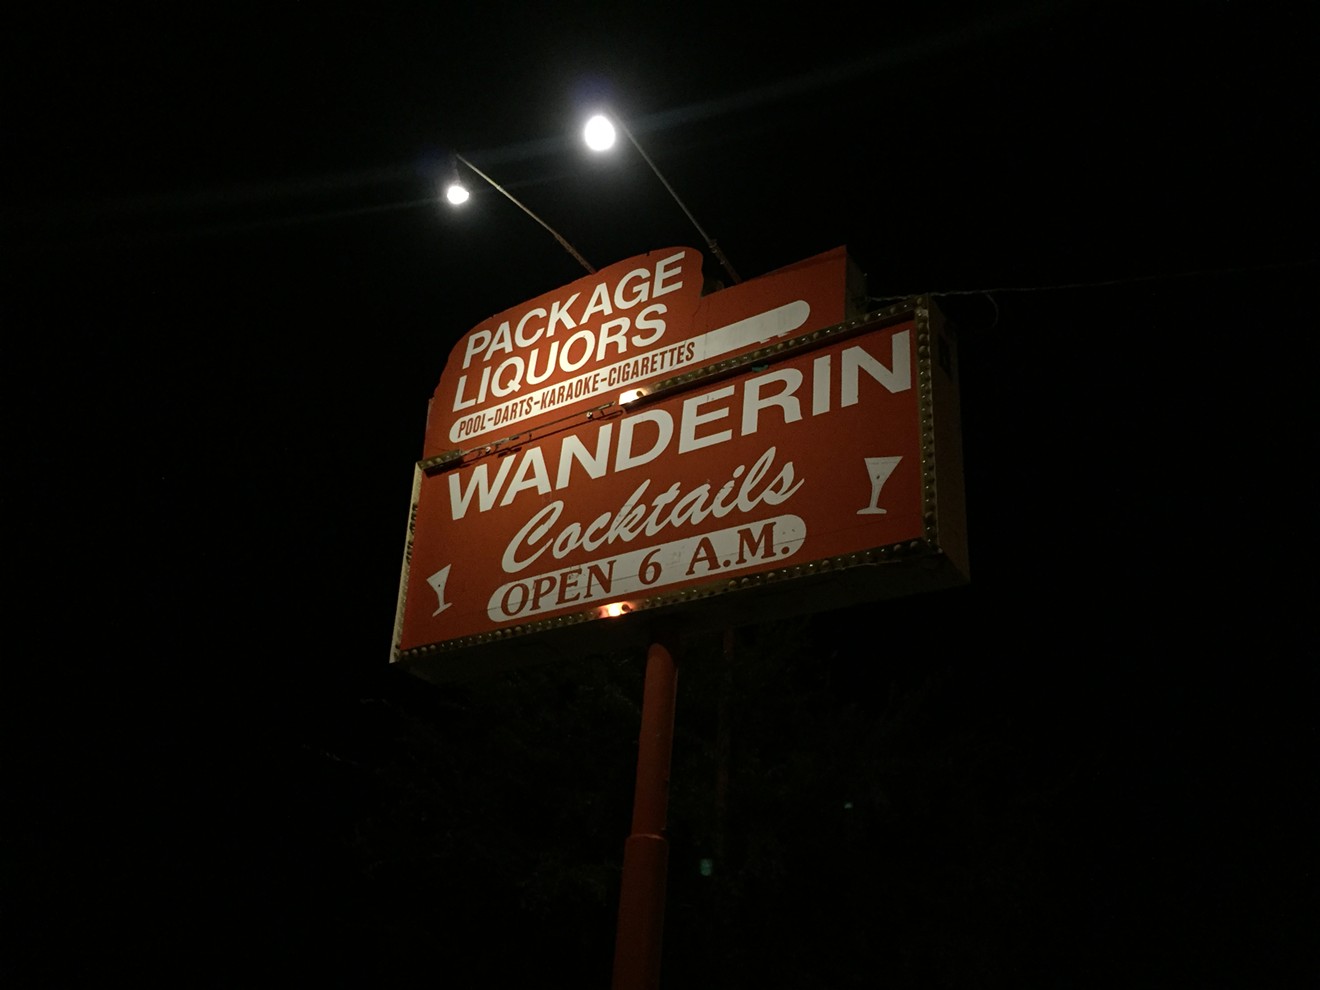 Start early, stay late, at Wanderin.